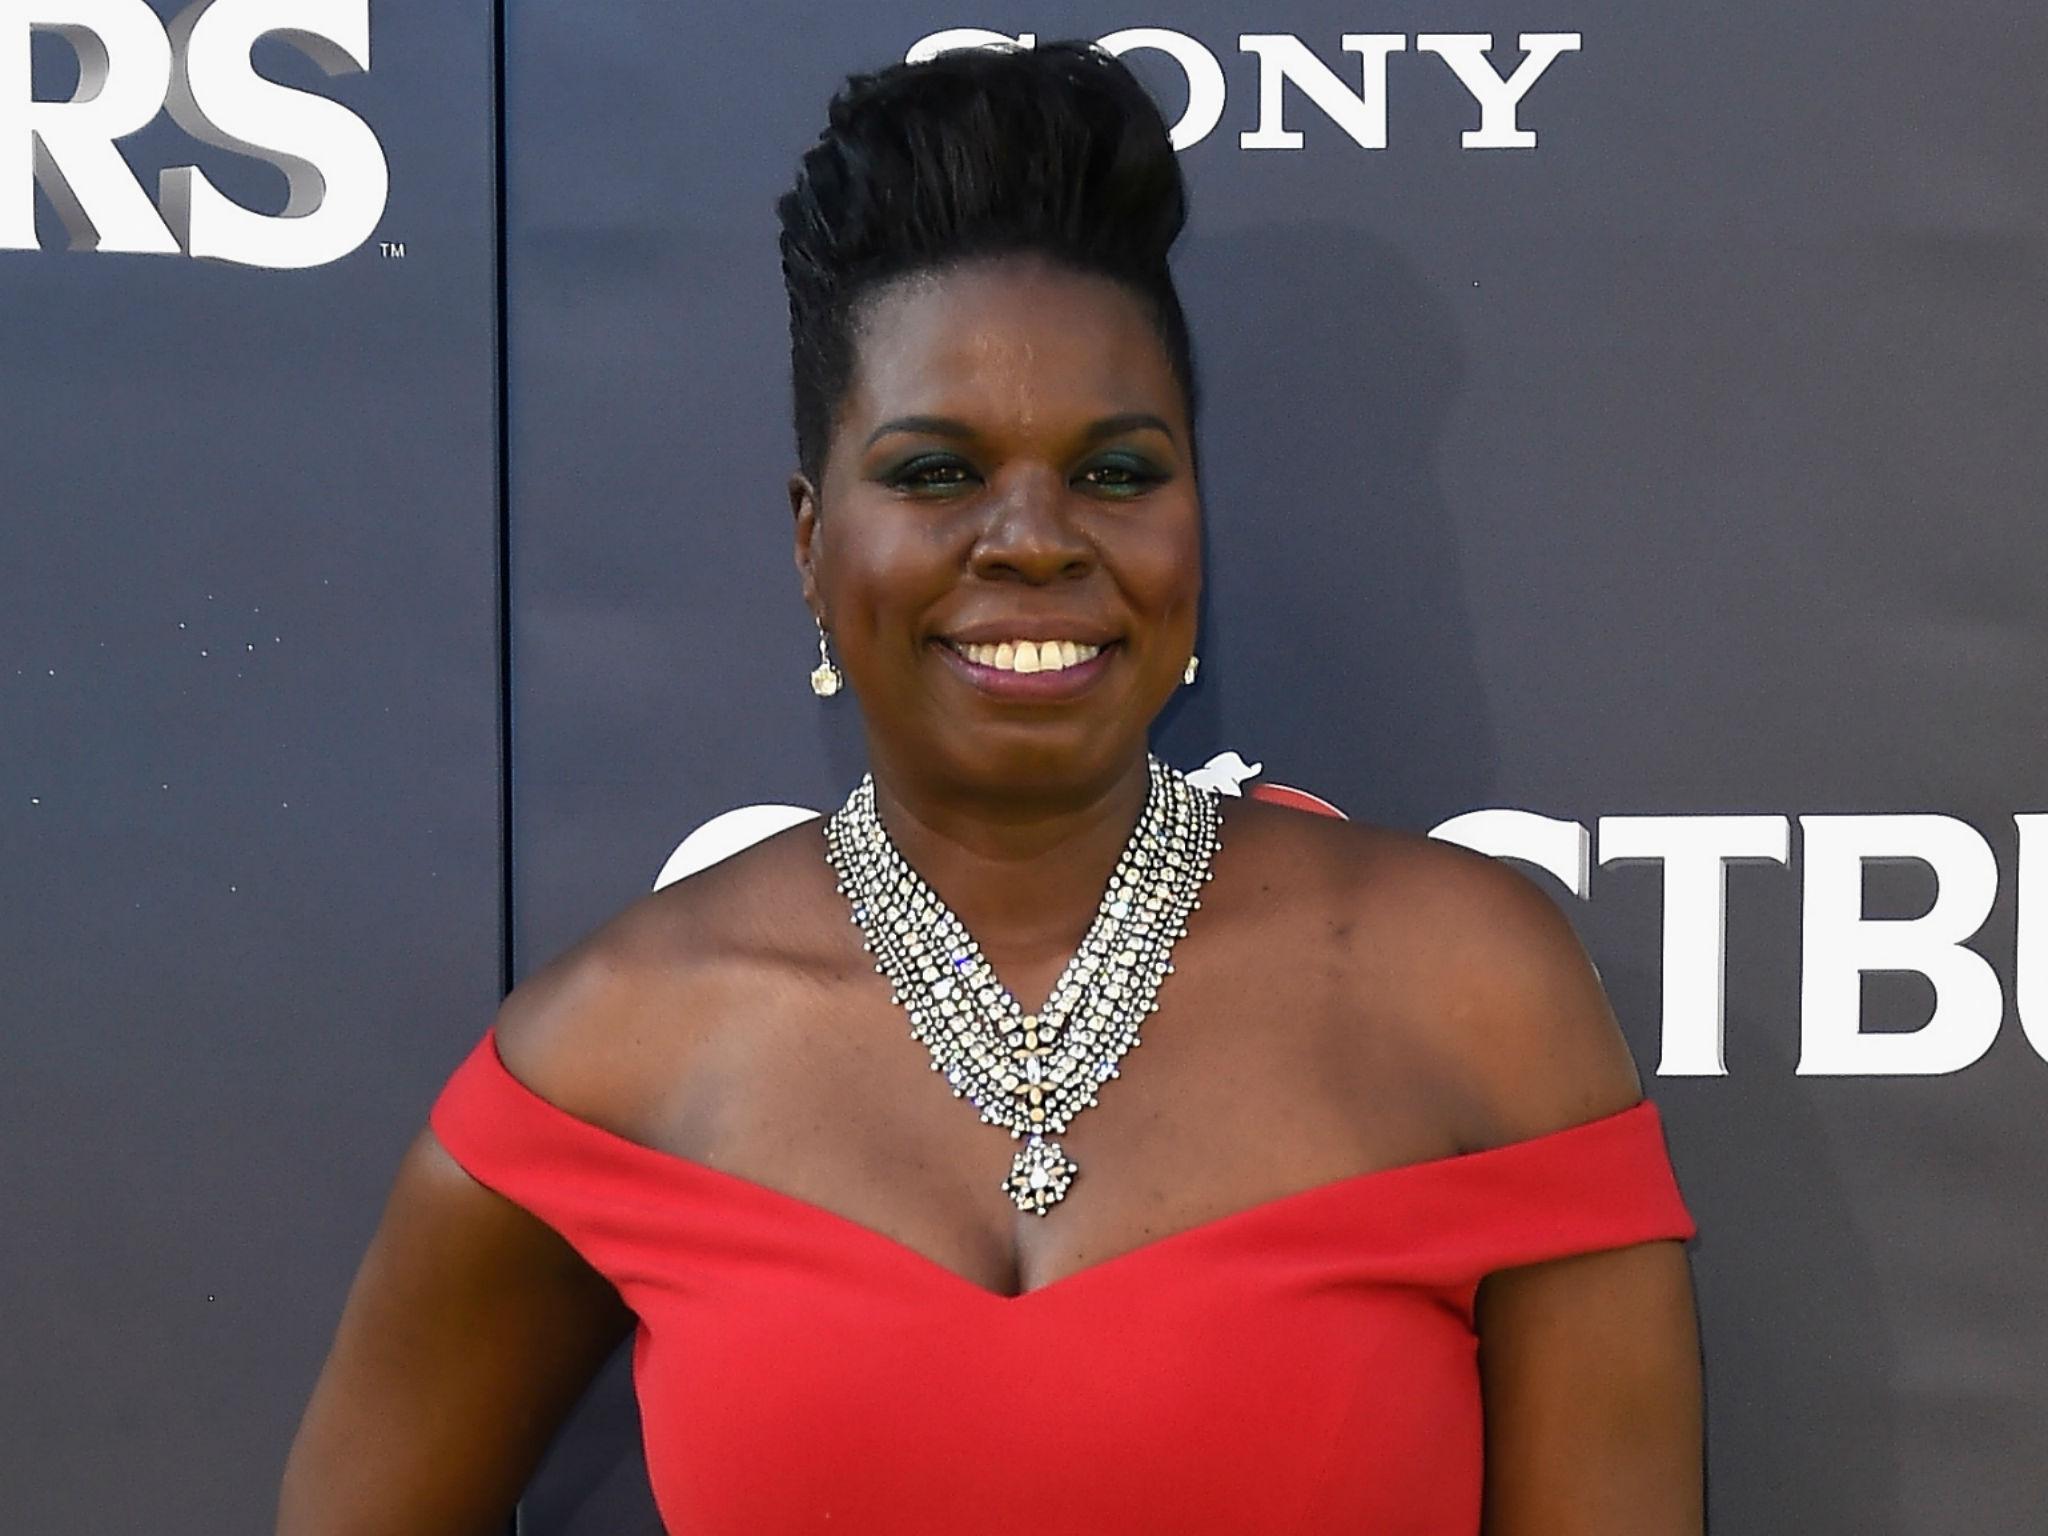 Leslie Jones was the subject of racist abuse on Twitter after the premiere of Ghostbusters